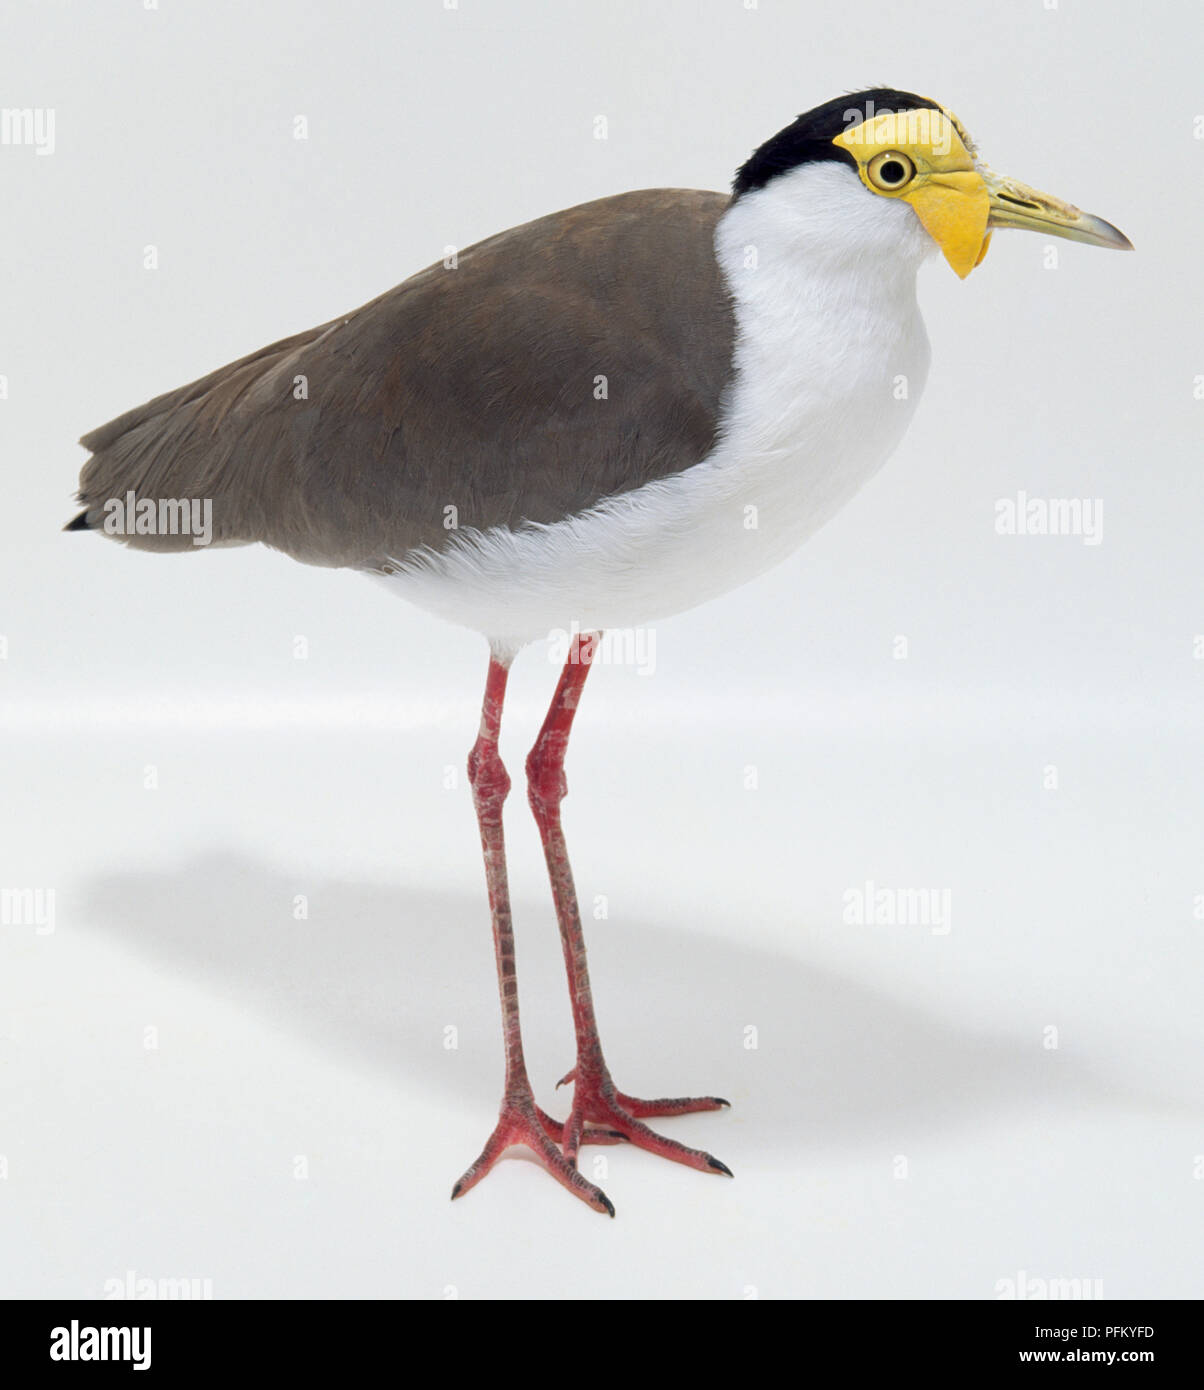 Side view of a Masked Lapwing with head in profile, showing the brown upper body, white lower body and neck plumage, a black cap on top of the head, yellow facial wattle and bill, and long legs. Stock Photo